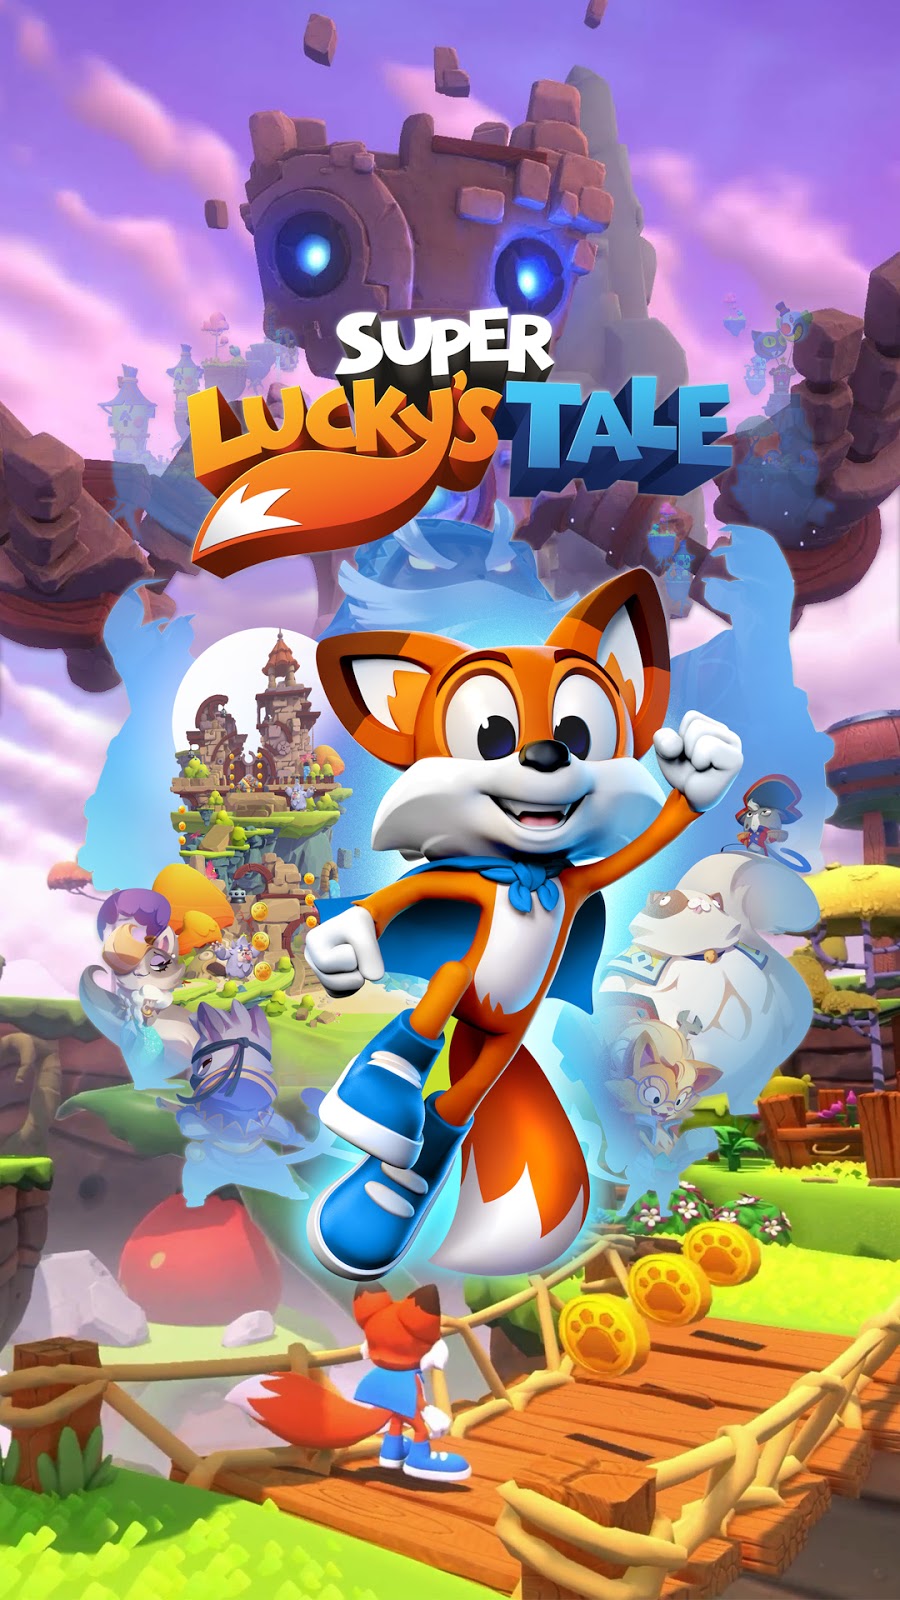 New lucky tale. Super Lucky s Tale. Super Lucky's Tale VR. Супер аркада. New super Lucky Tale.